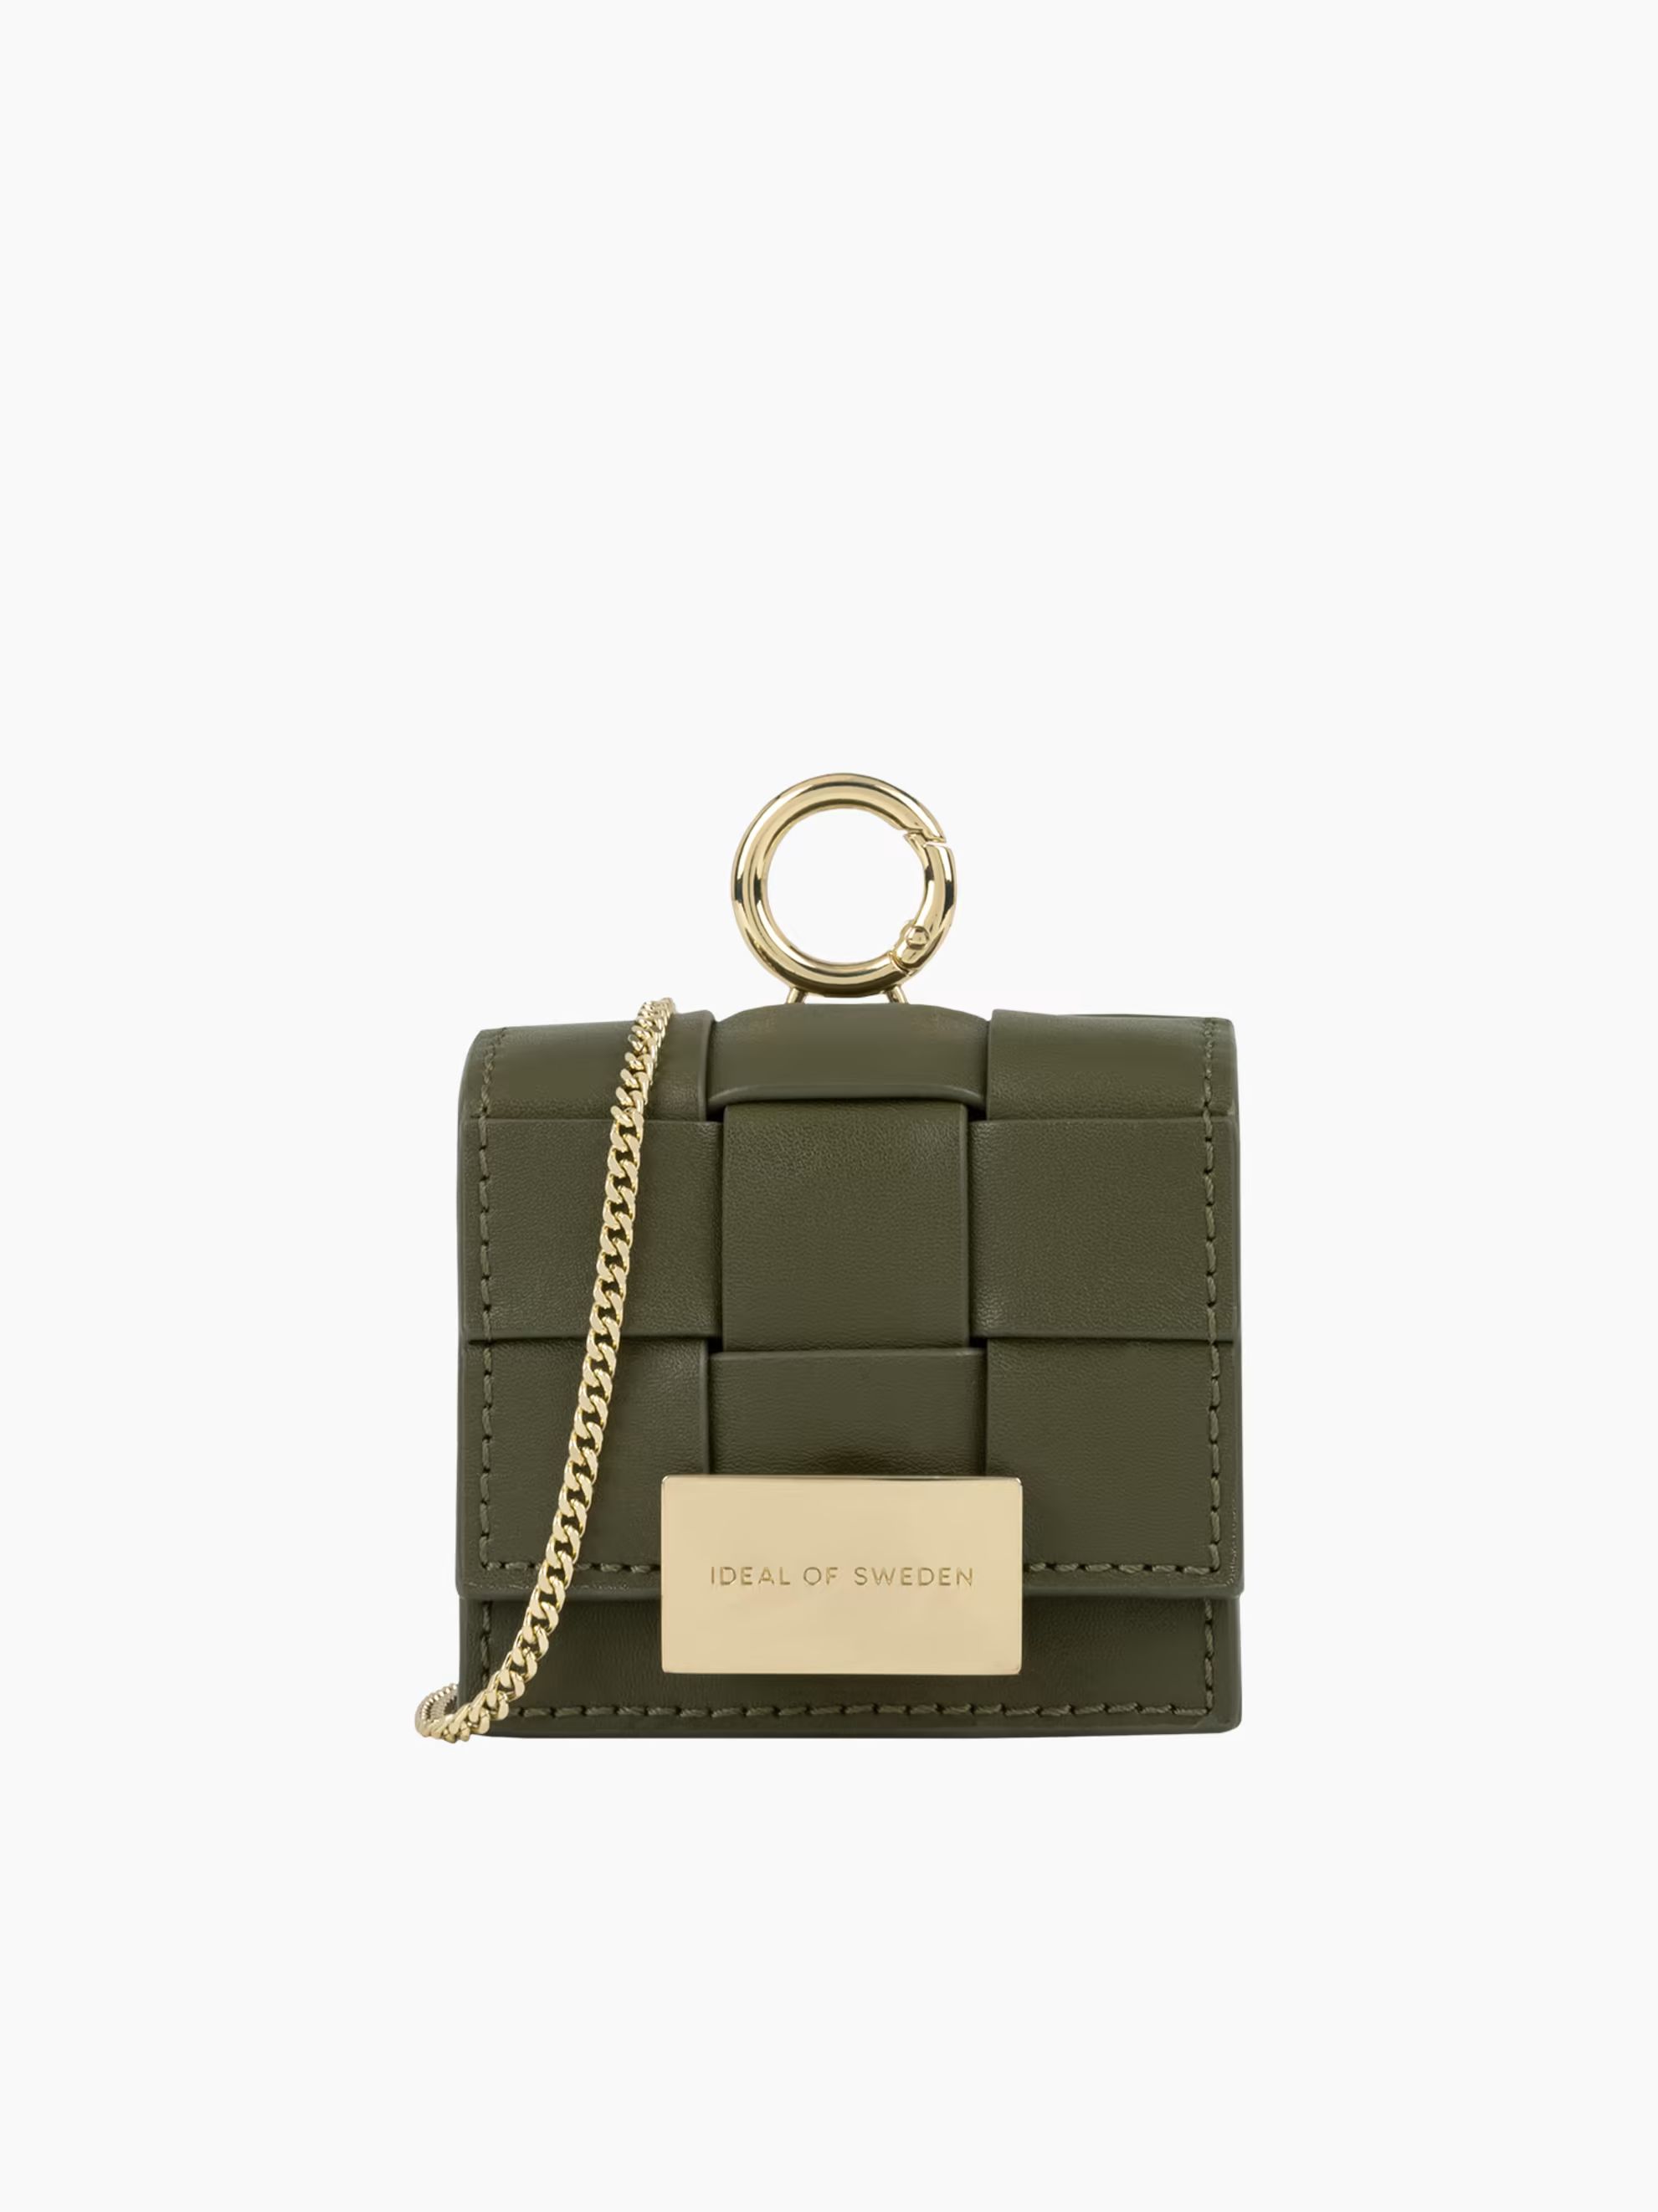 Braided Mini Bag, Olive - Ideal Of Sweden | New York & Company